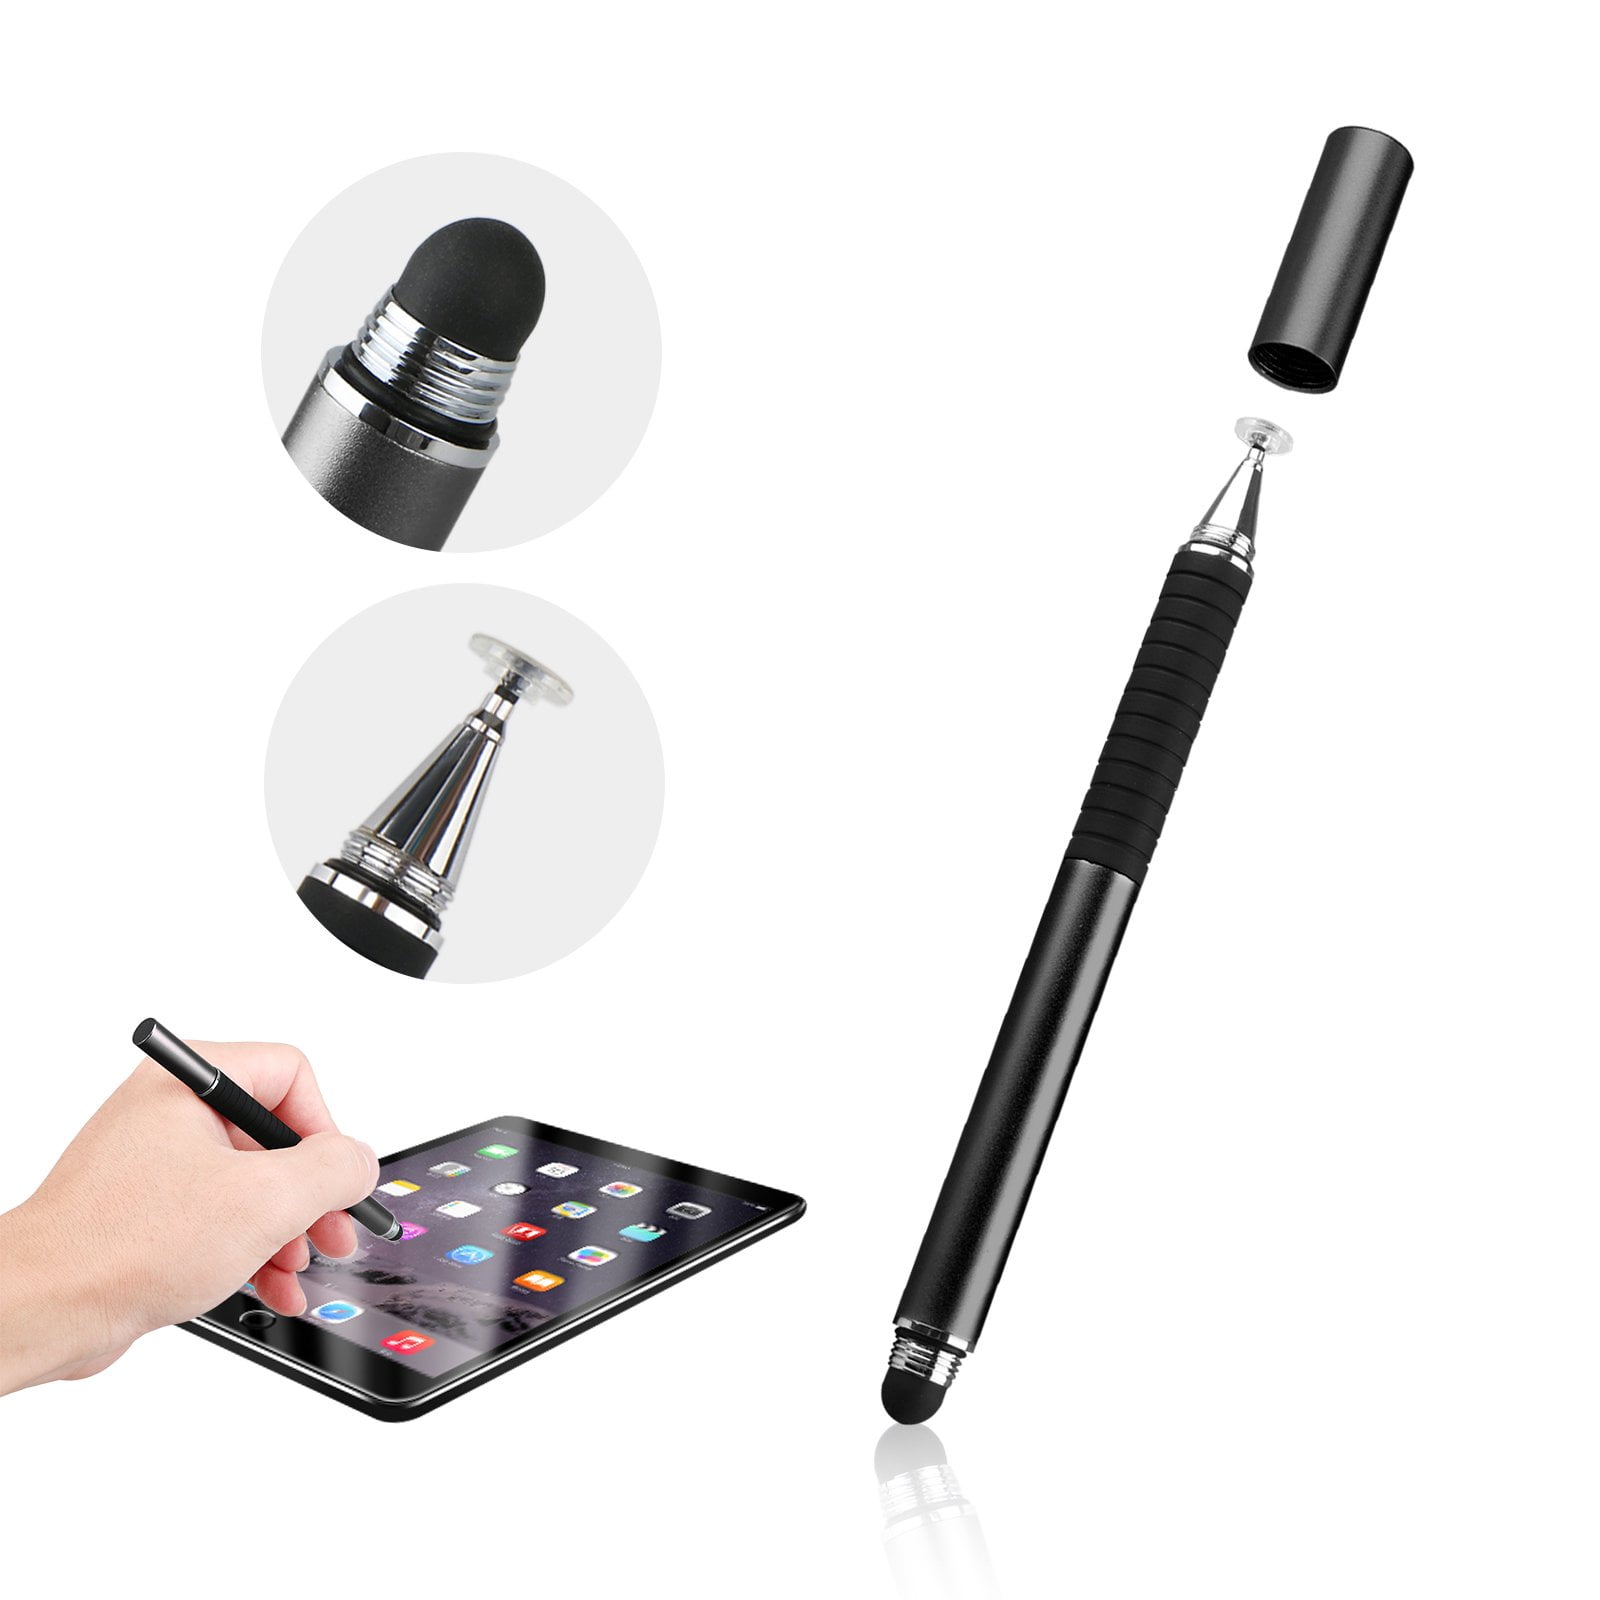 2in1 Capacitive Touch Screen Stylus/Ball Point Pen for iPad iPhone iPod Black ZH 